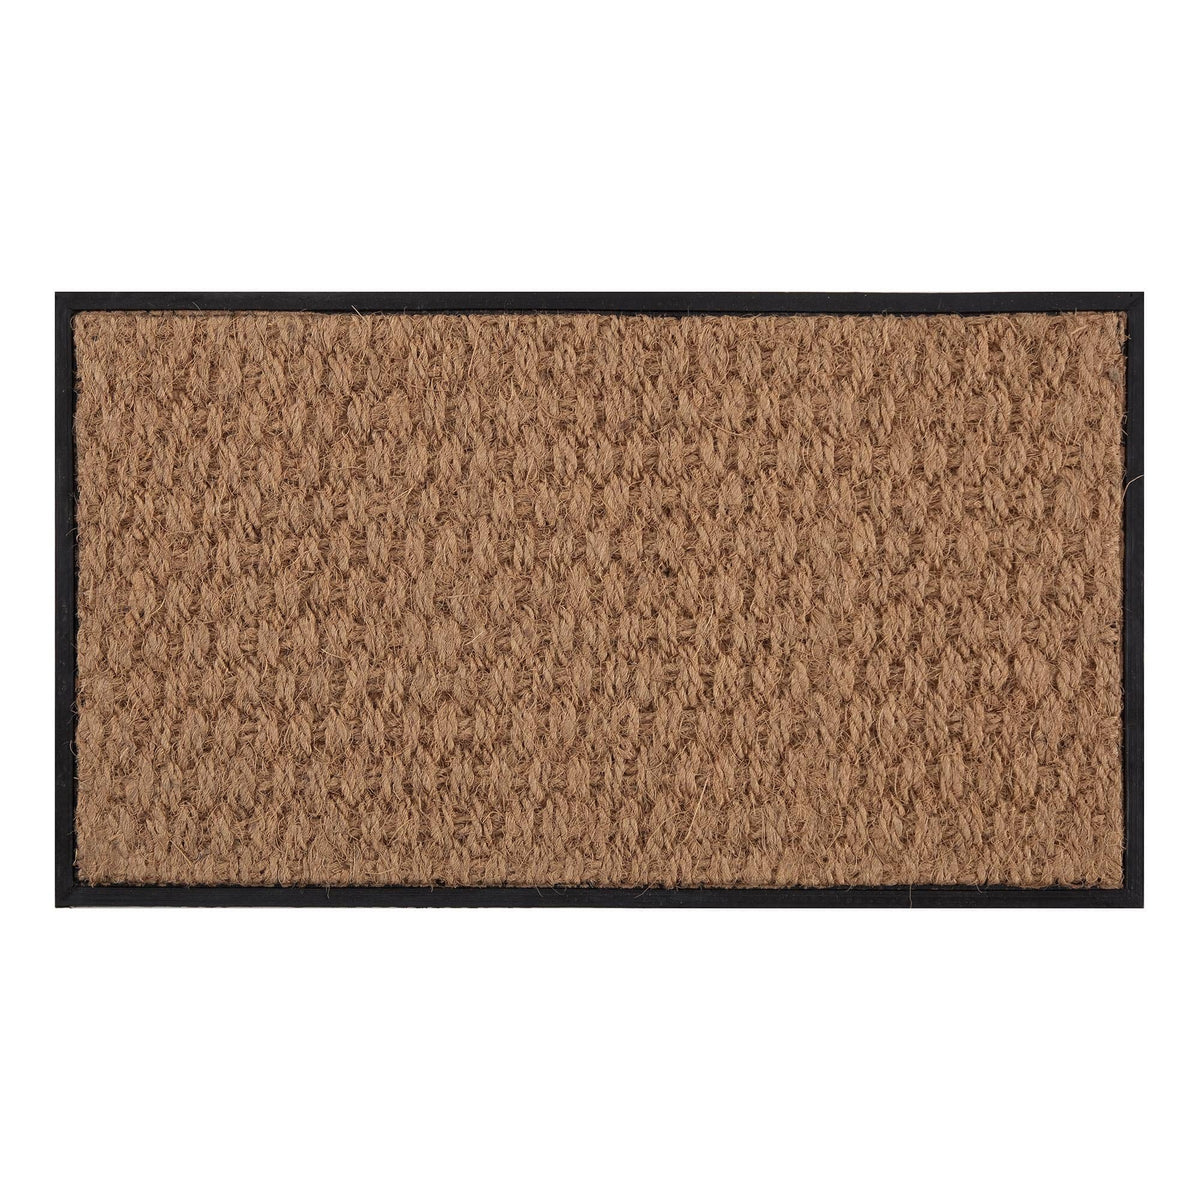 Anji Mountain Natural & Recycled Rubber Boot Tray with Tan Coir Insert